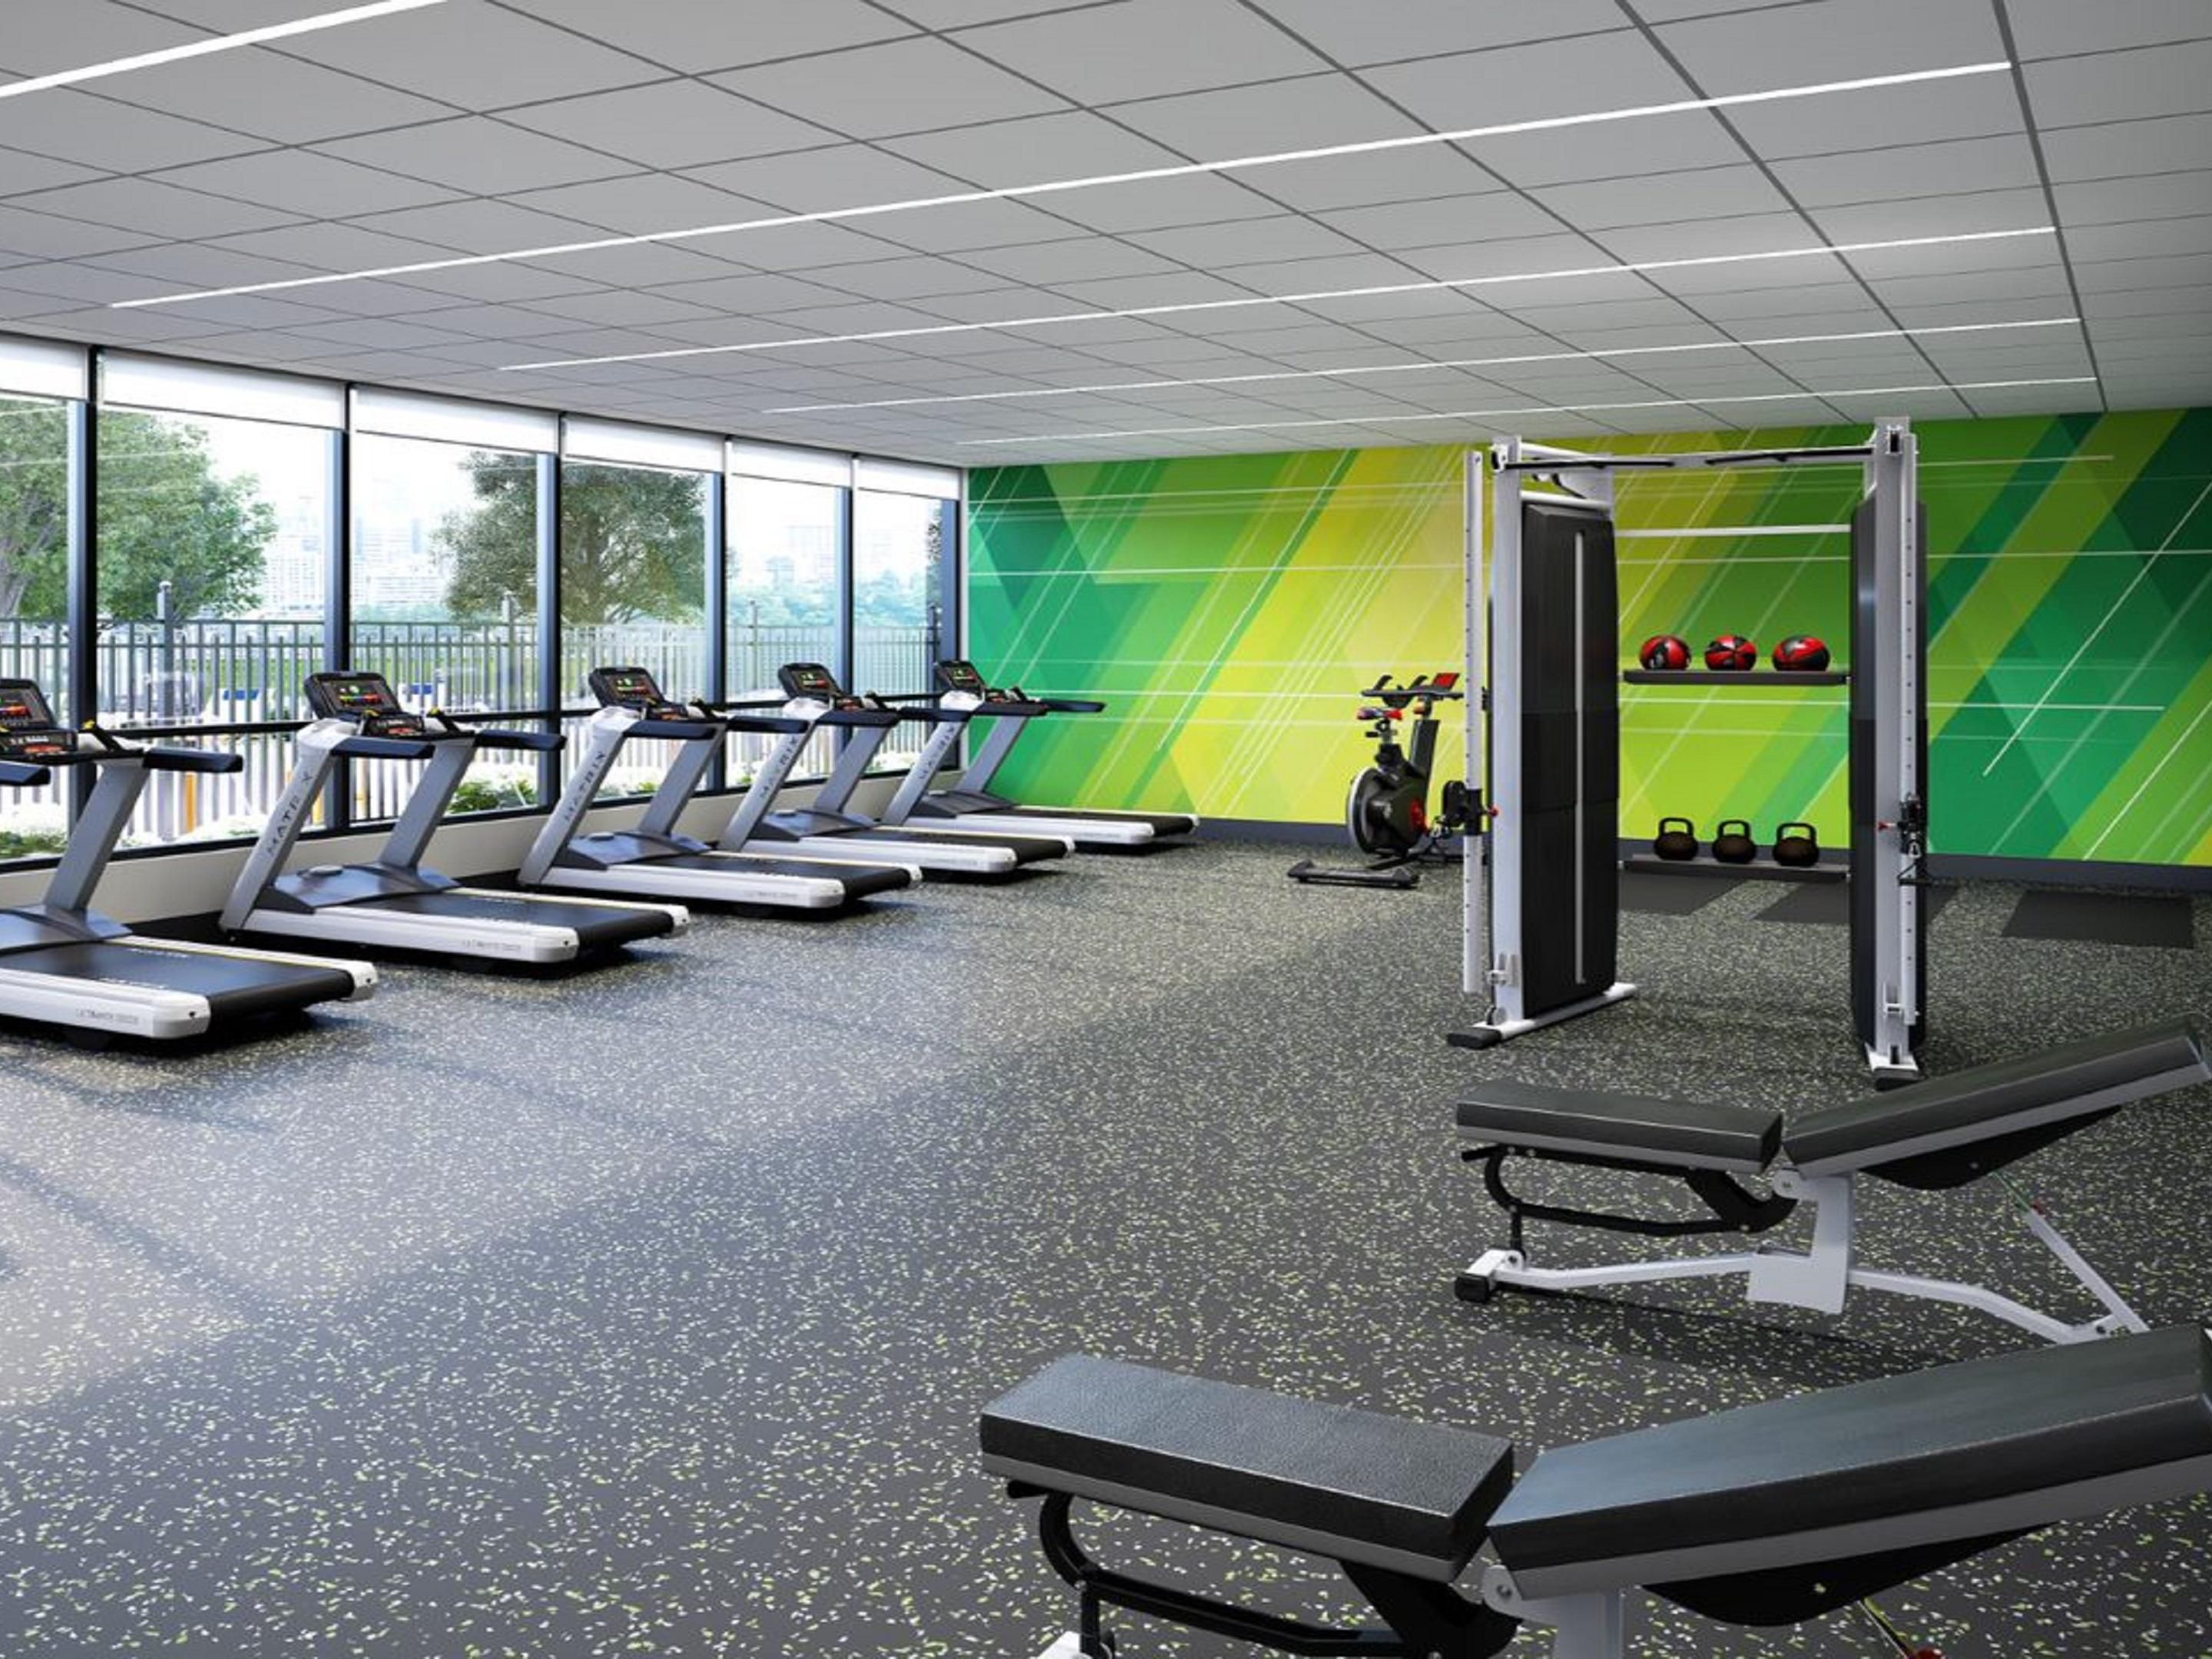 Get your sweat on in our complimentary, fully equipped Fitness Center open 6am-10pm.